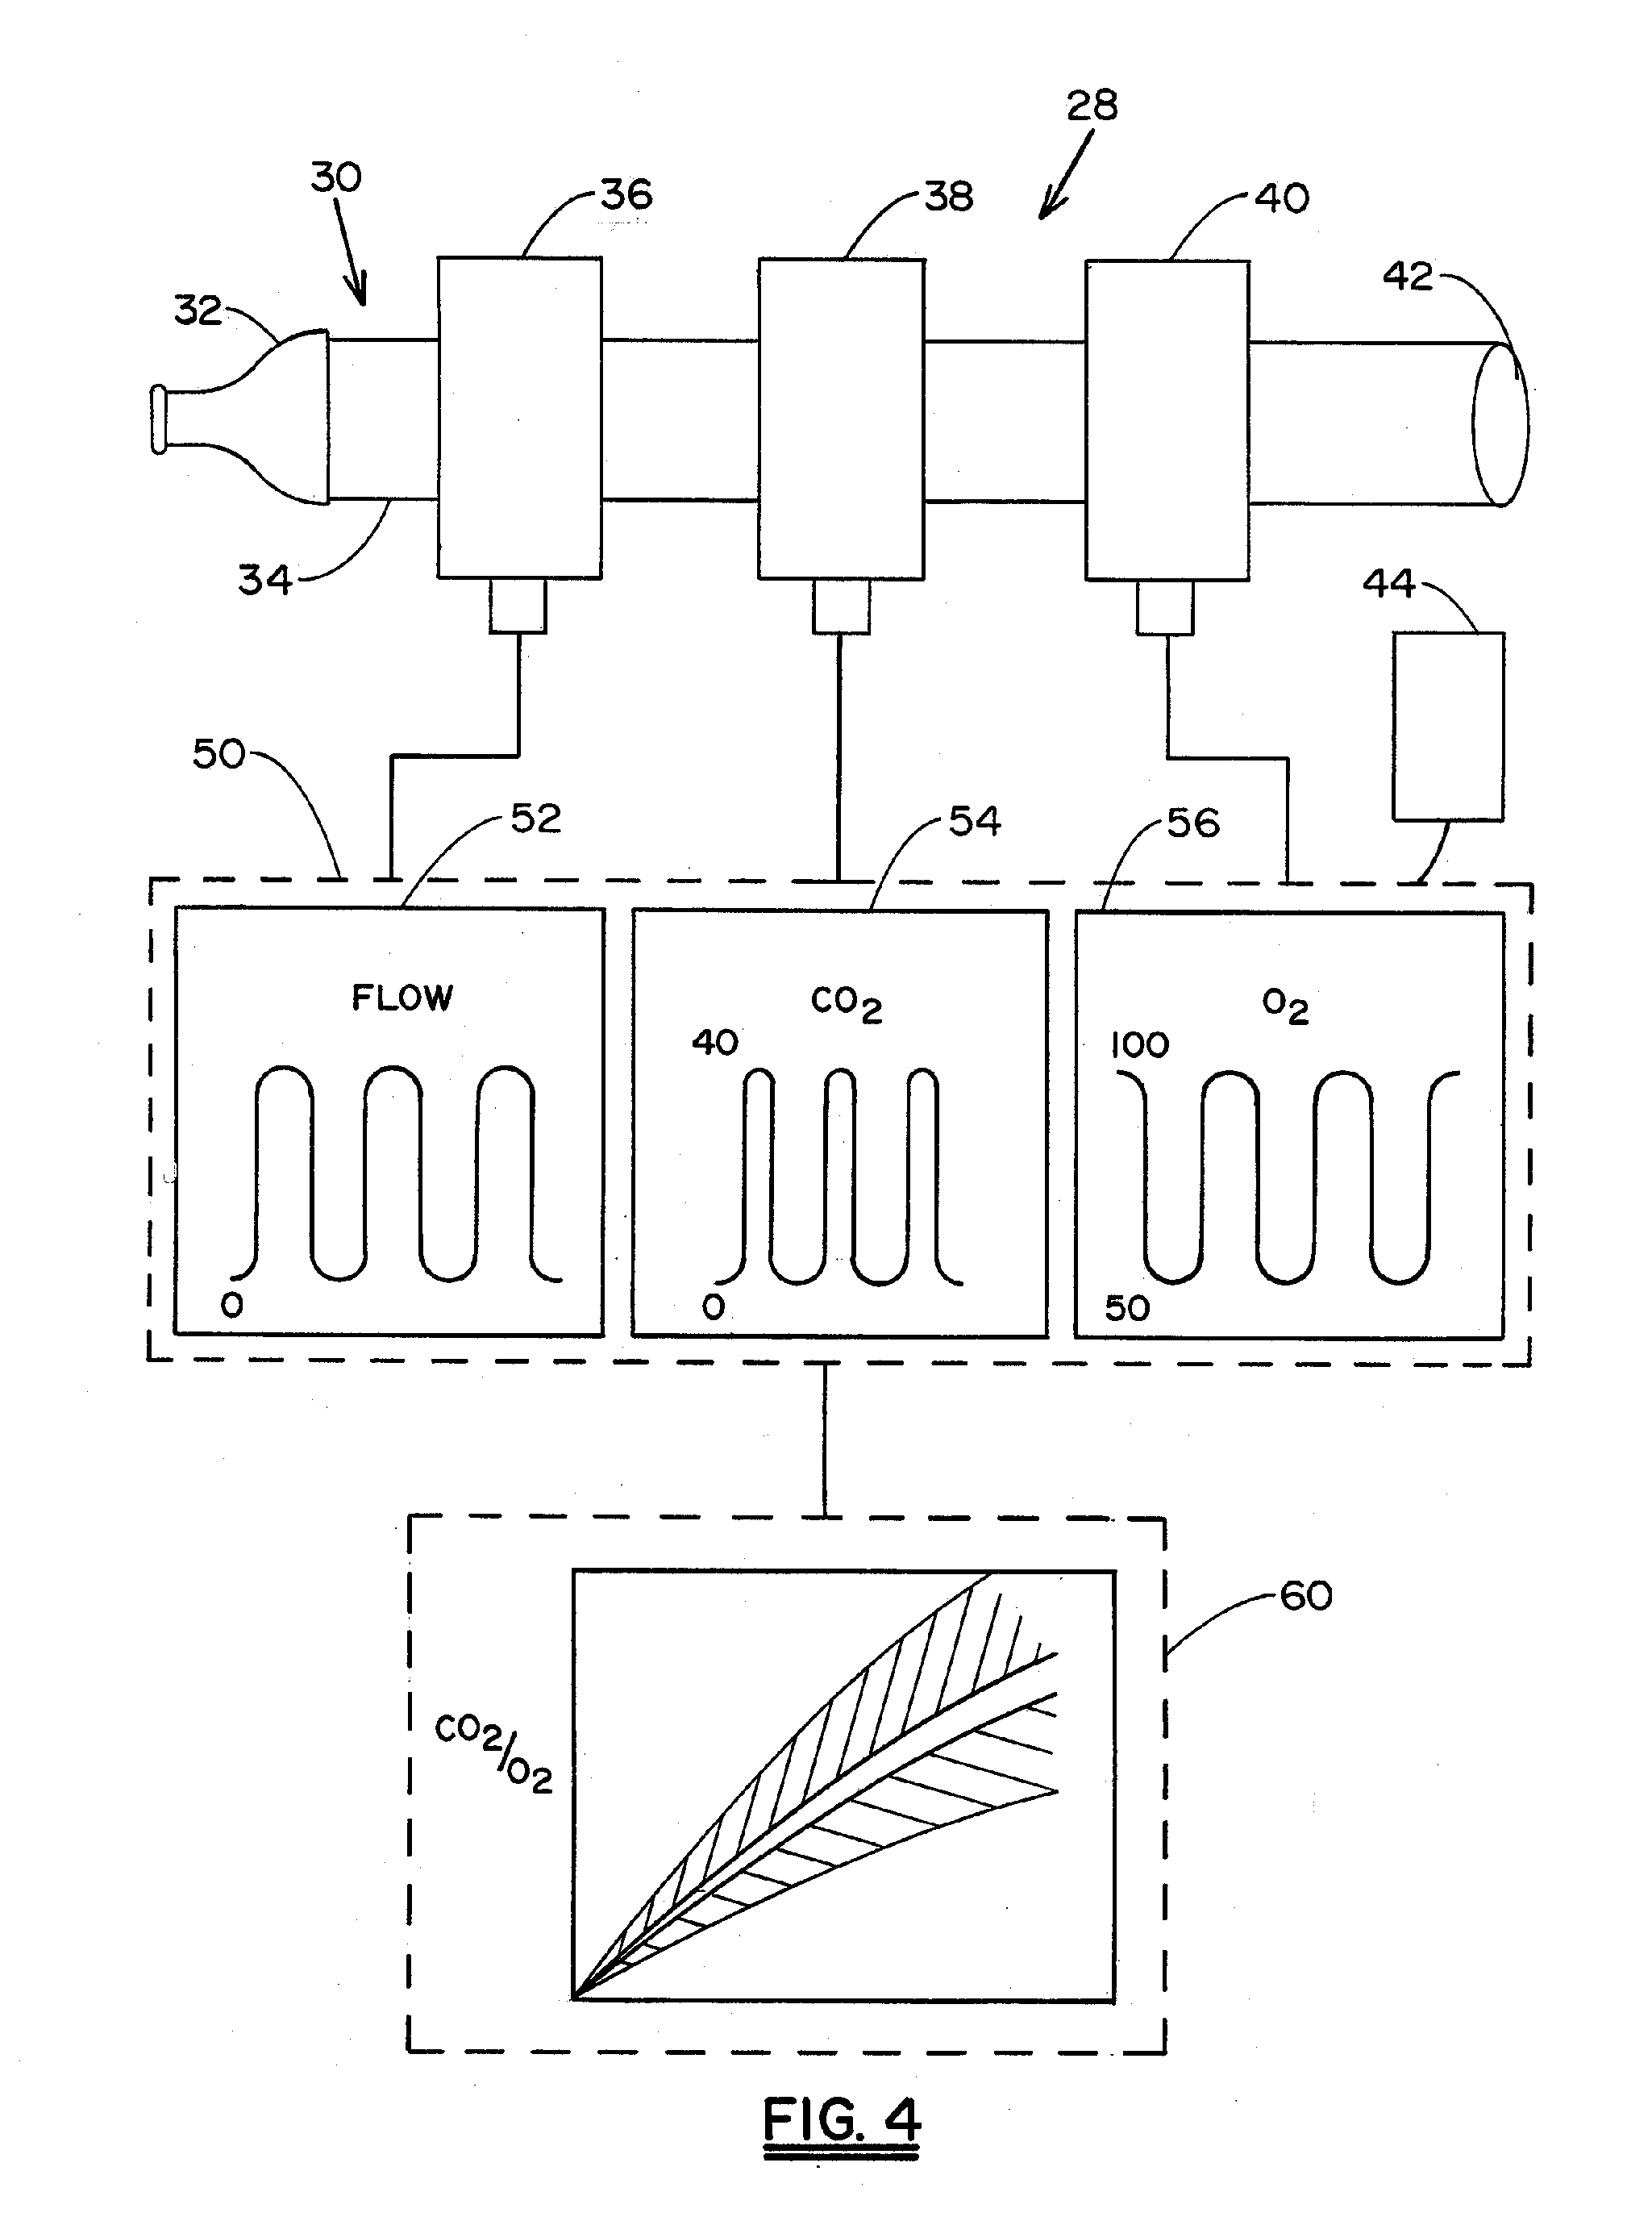 Non-Invasive Device and Method For the Diagnosis of Pulmonary Vascular Occlusions